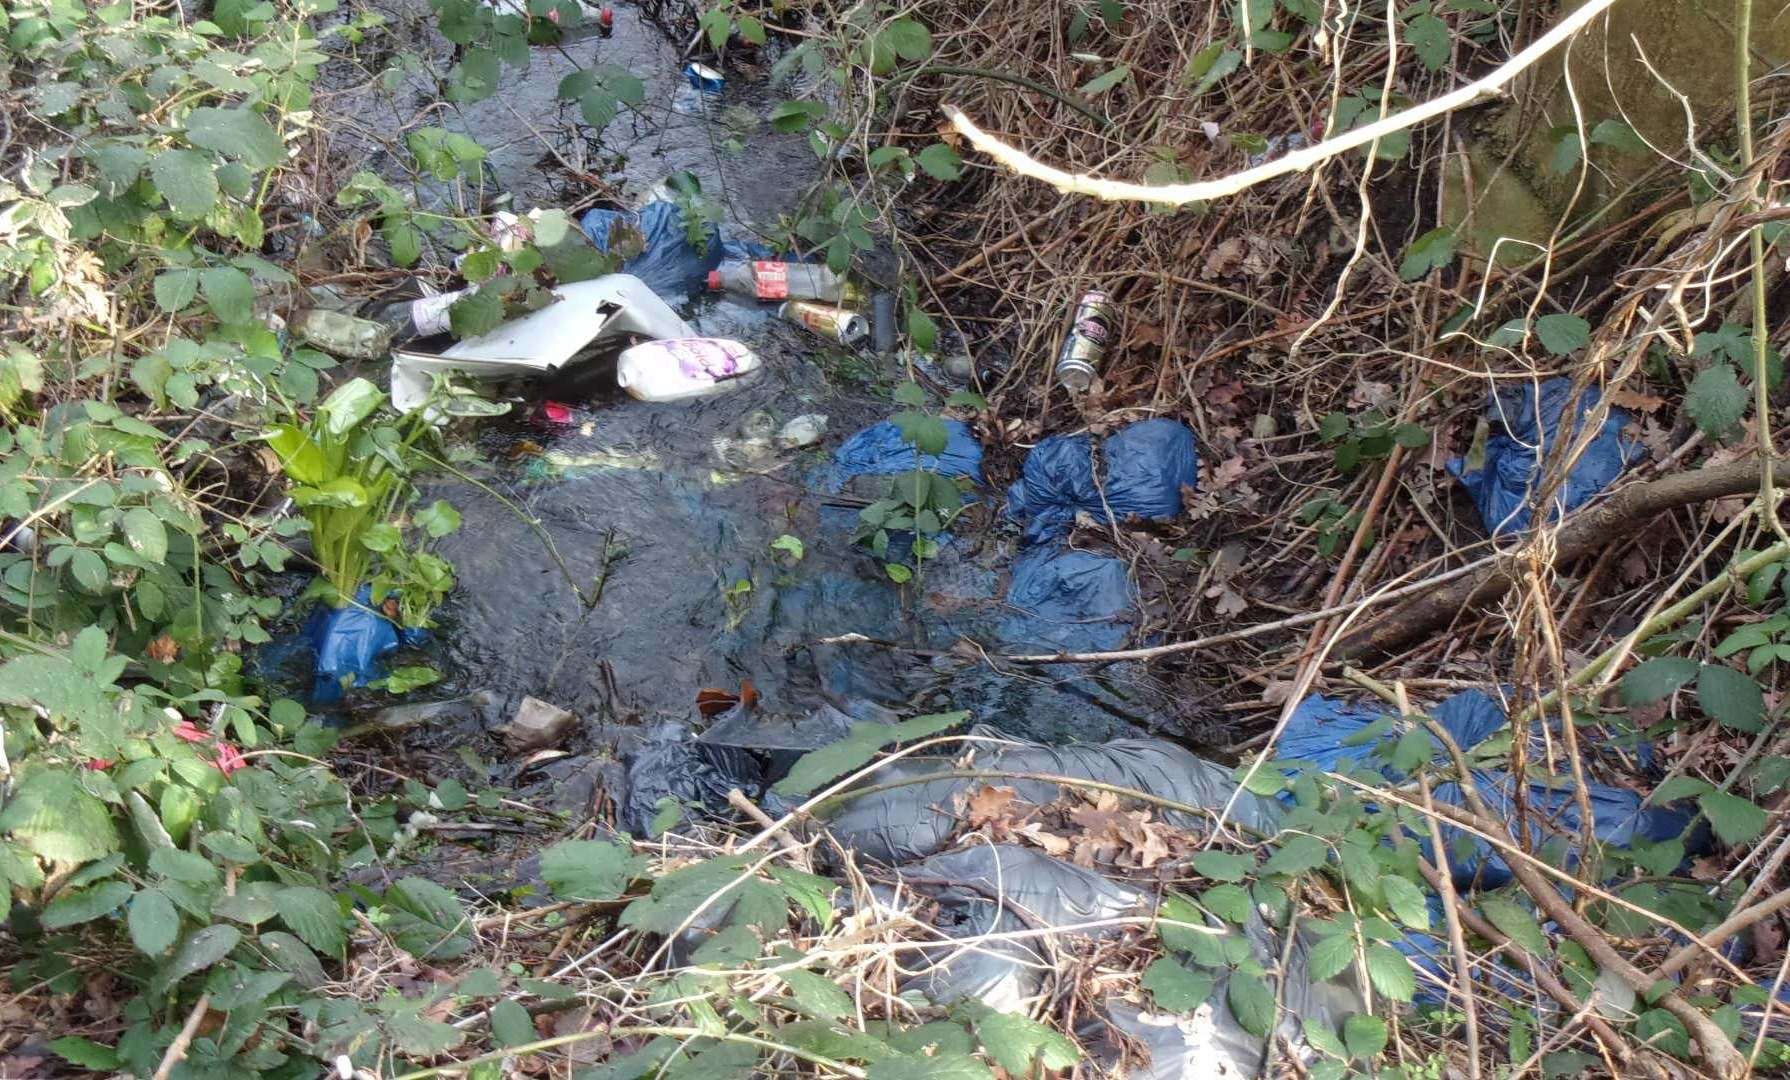 The Cooksditch Stream in Faversham was filled with 17 tonnes of rubbish